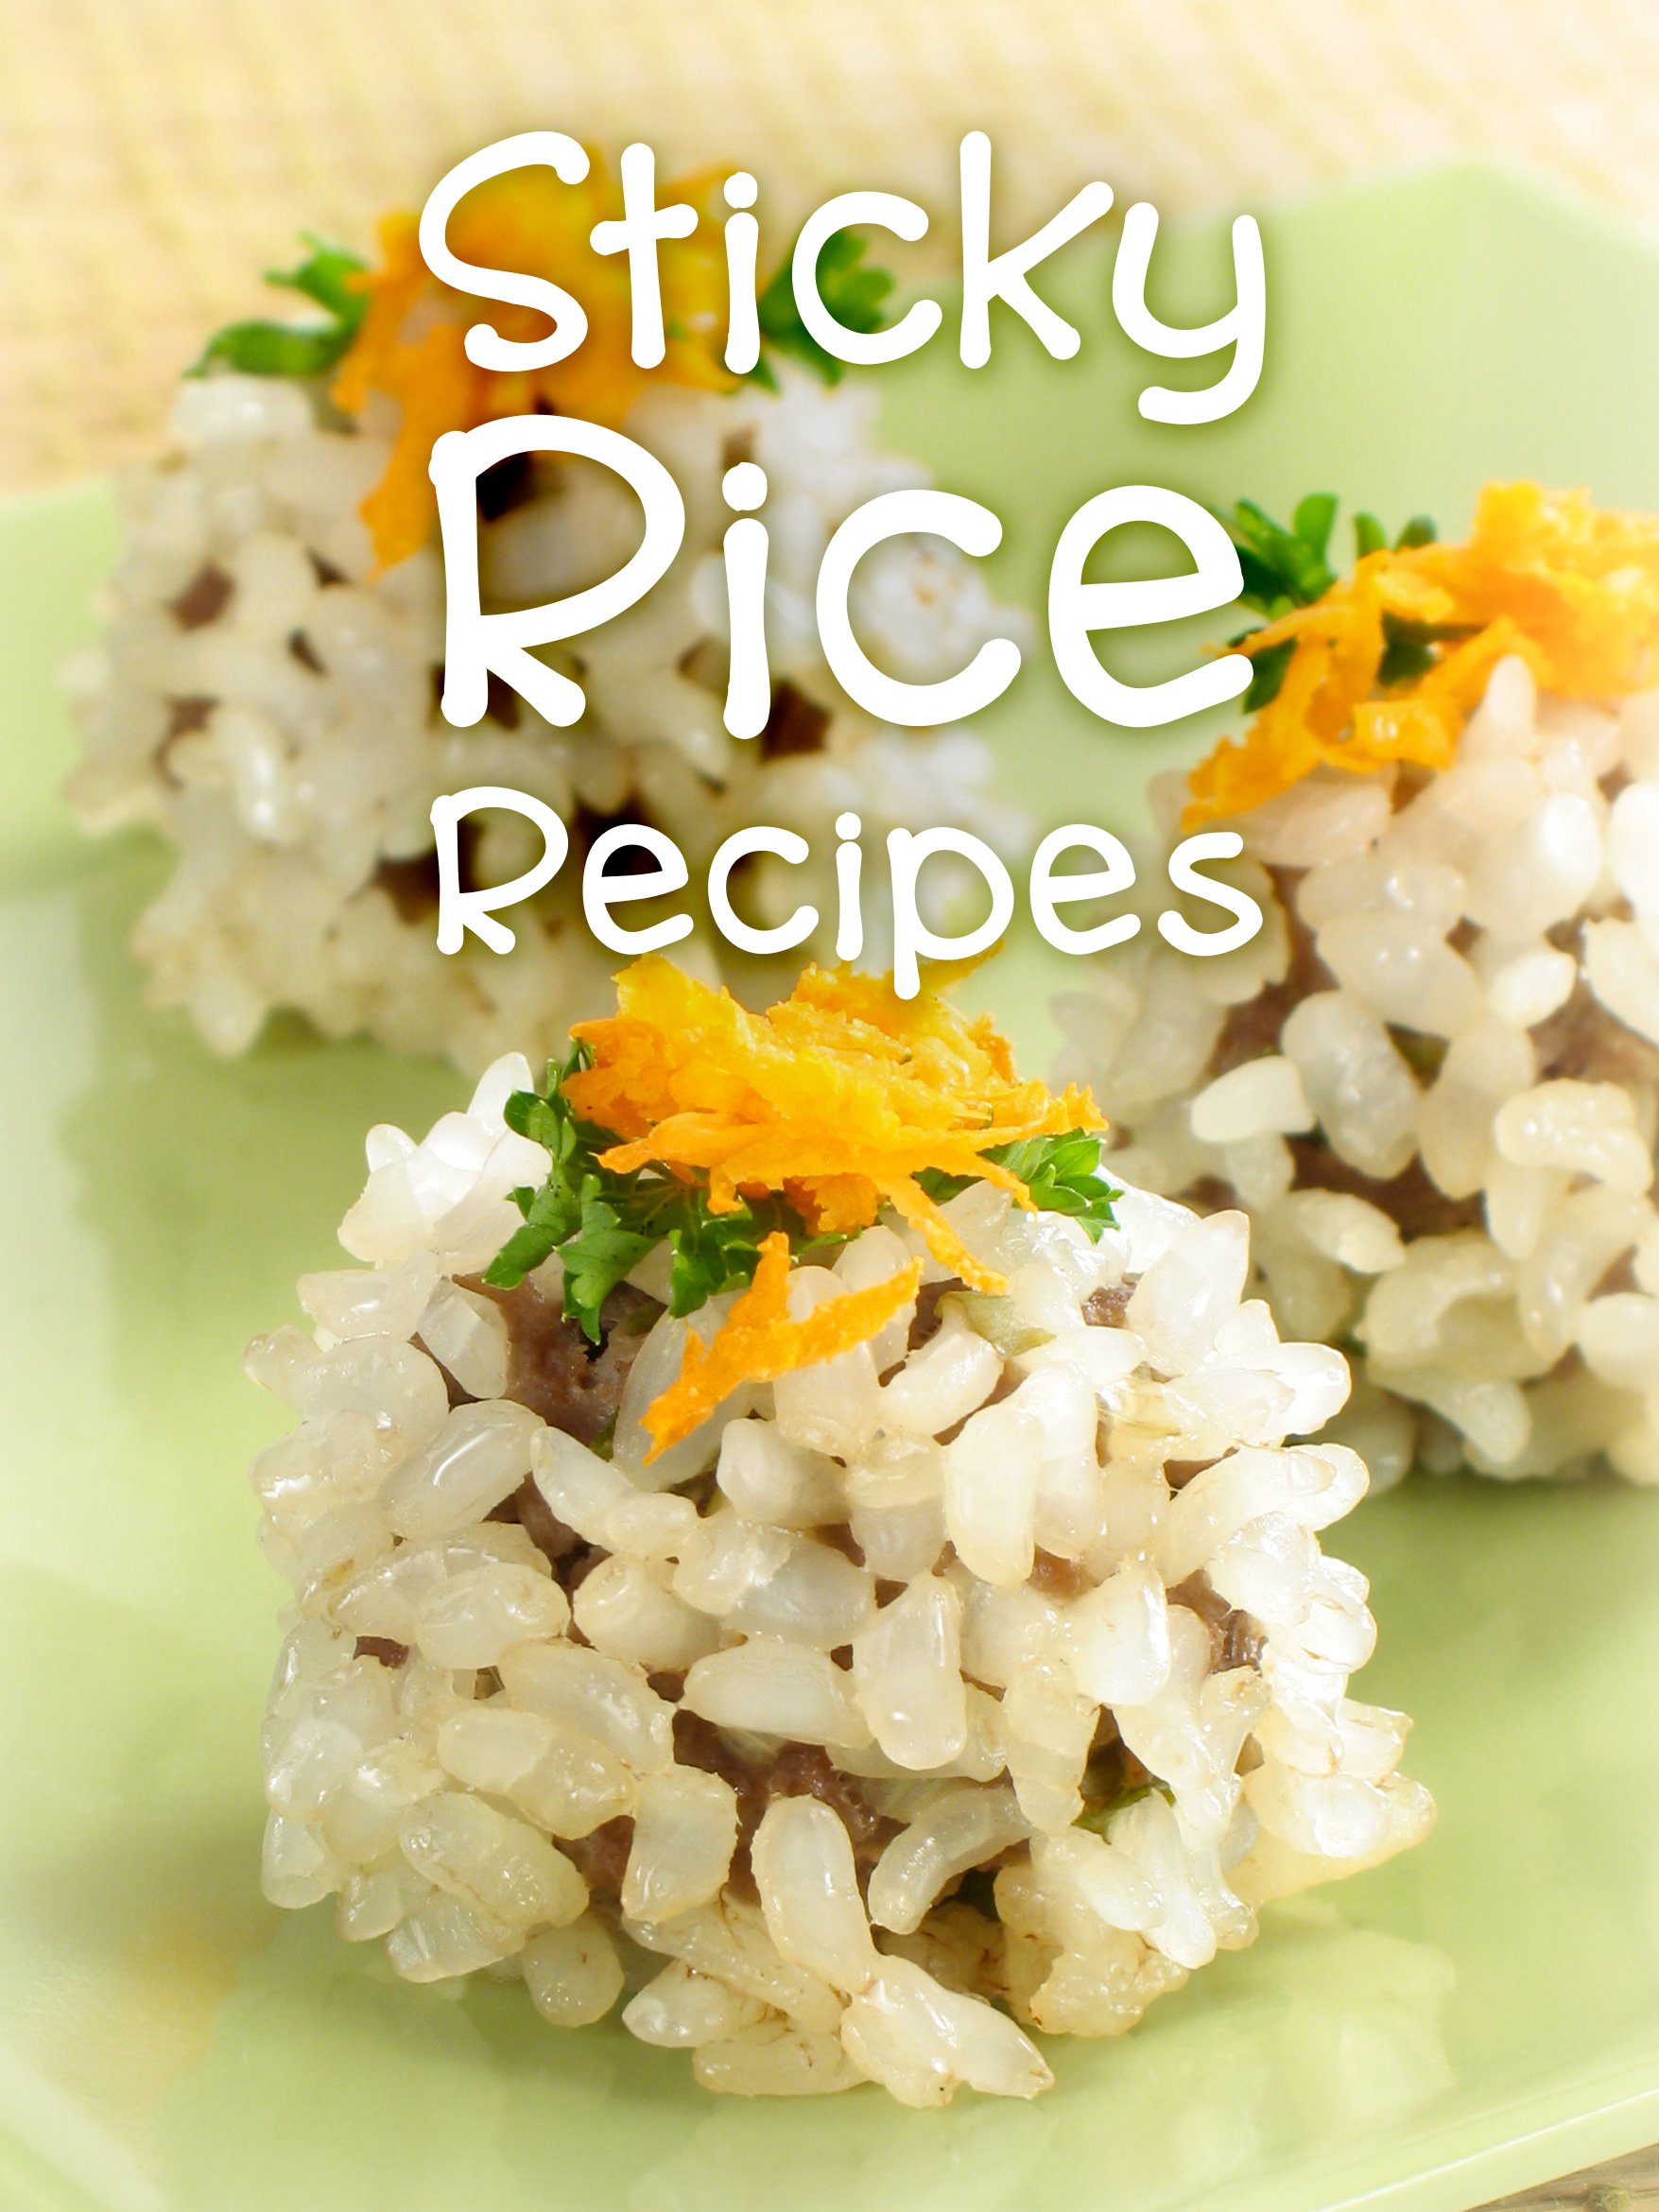 Top 50 Most Delicious Sticky Rice Recipes [A Glutinous Rice Cookbook] (Recipe Top 50's Book 110)